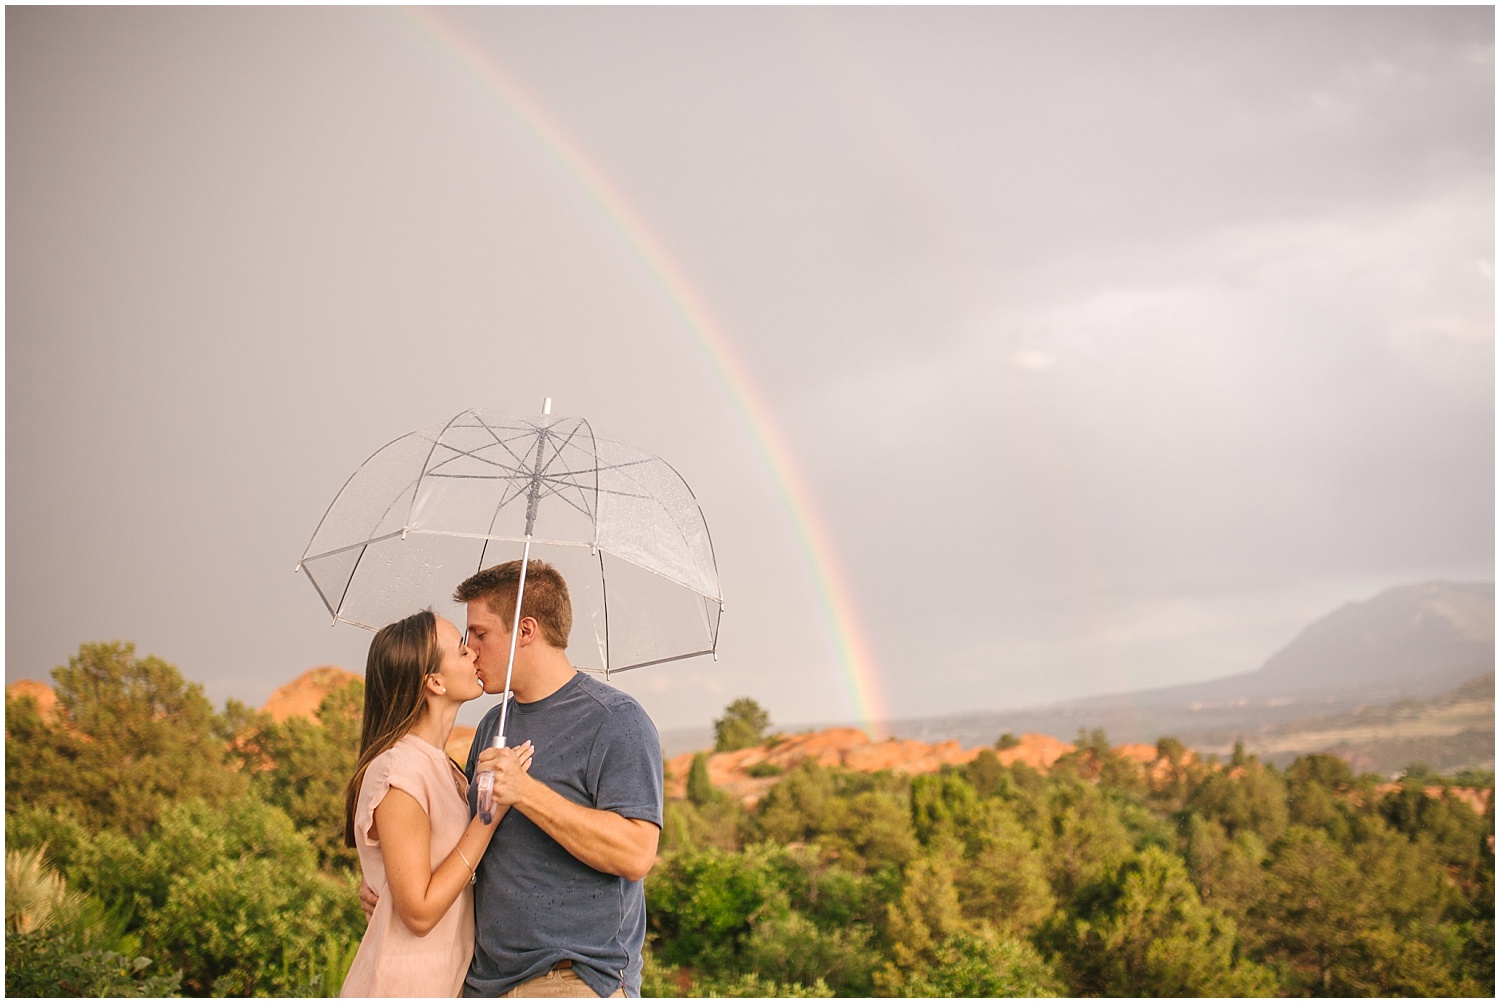 Double rainbow over couple with umbrella at Garden of the Gods in Colorado Springs